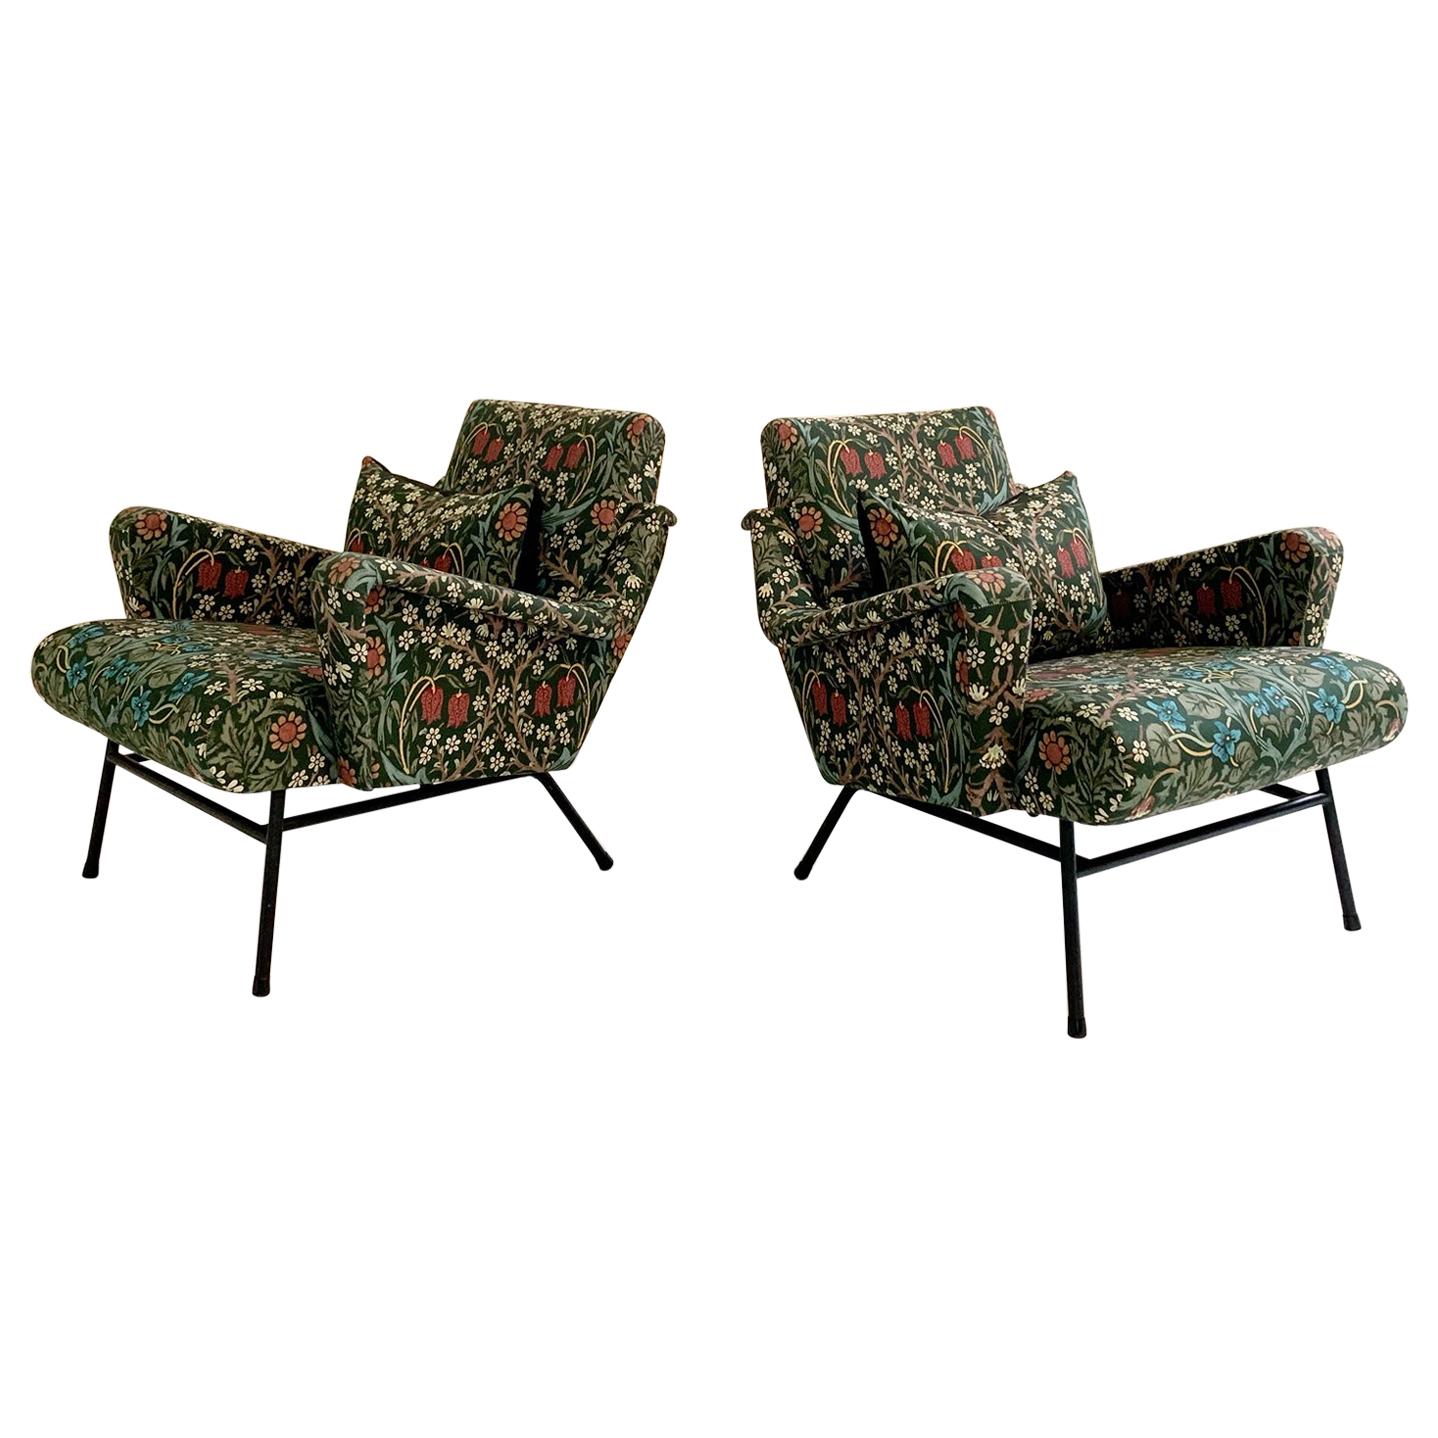 Midcentury French Lounge Chairs in William Morris Blackthorn, Pair